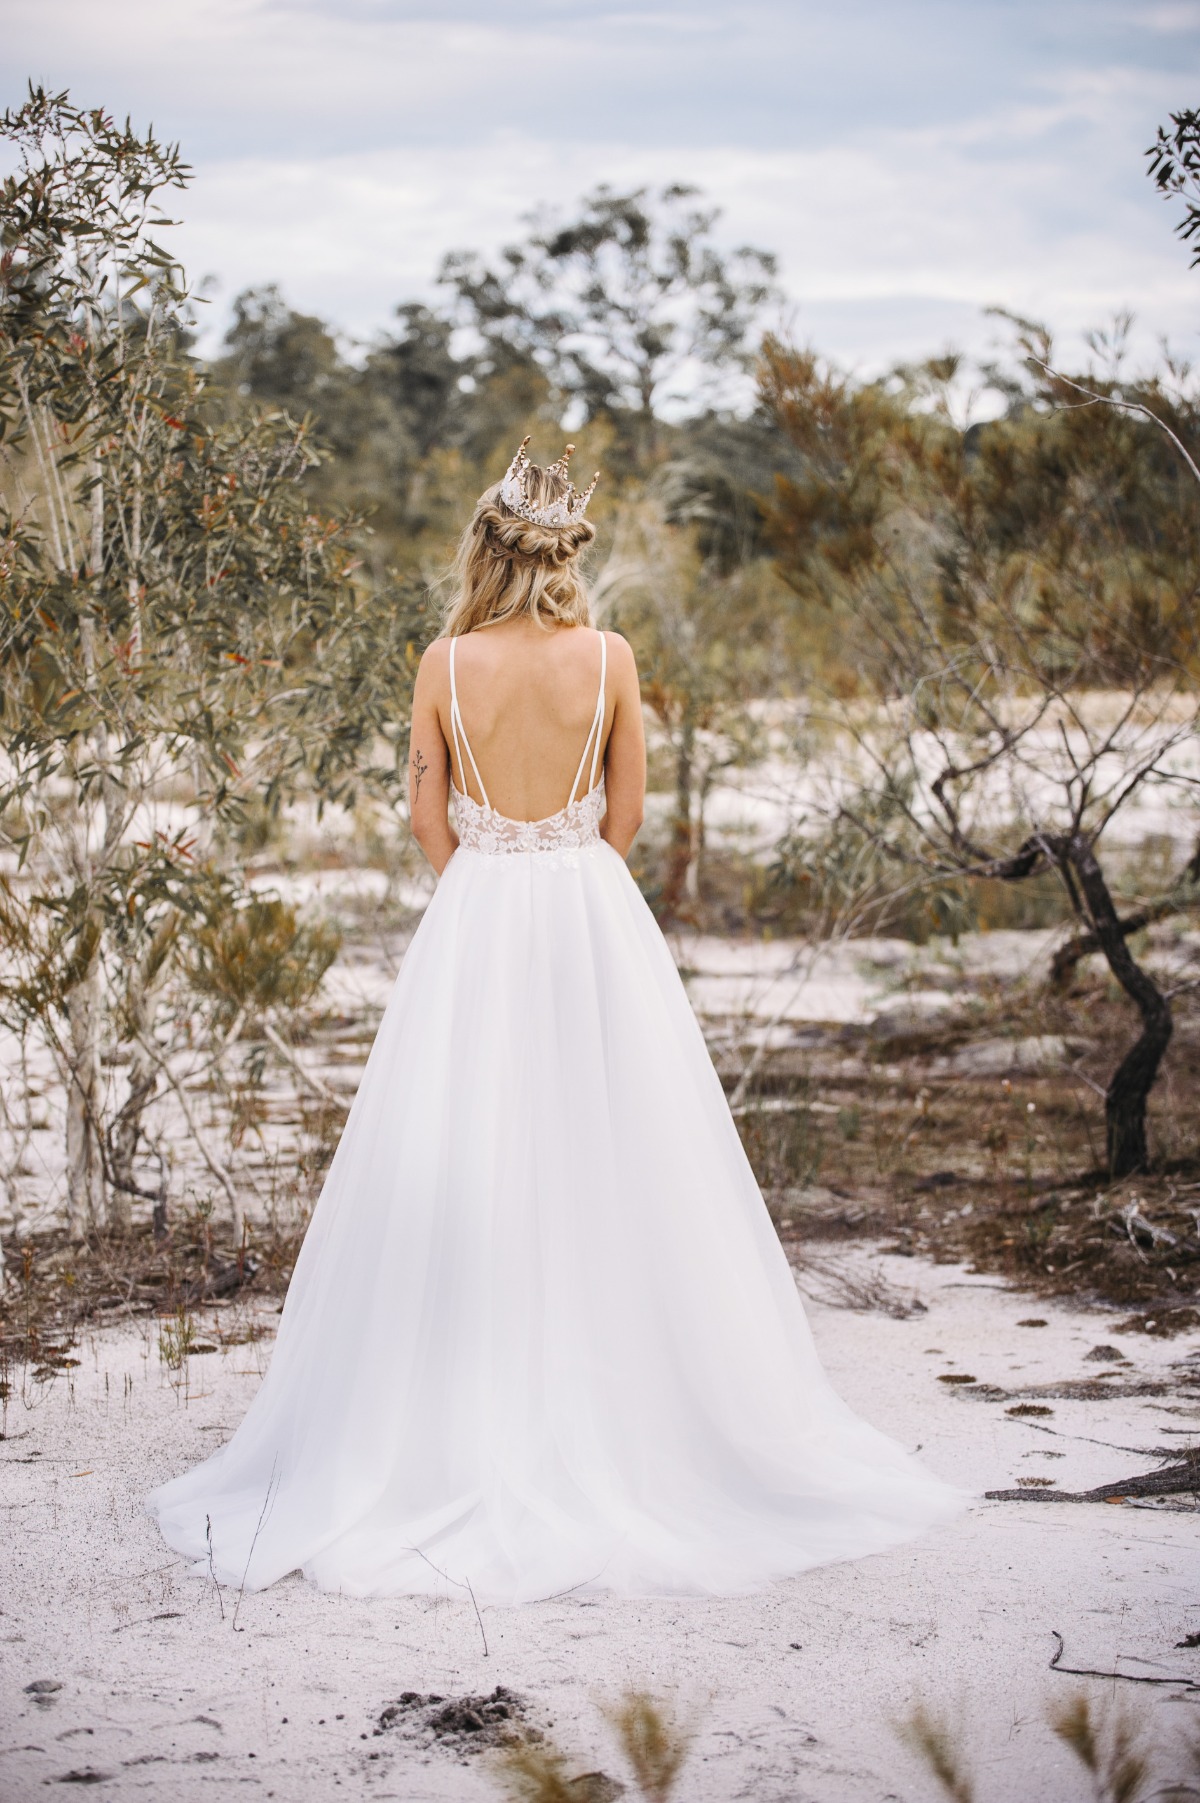 Elizabeth gown from Goddess by Nature